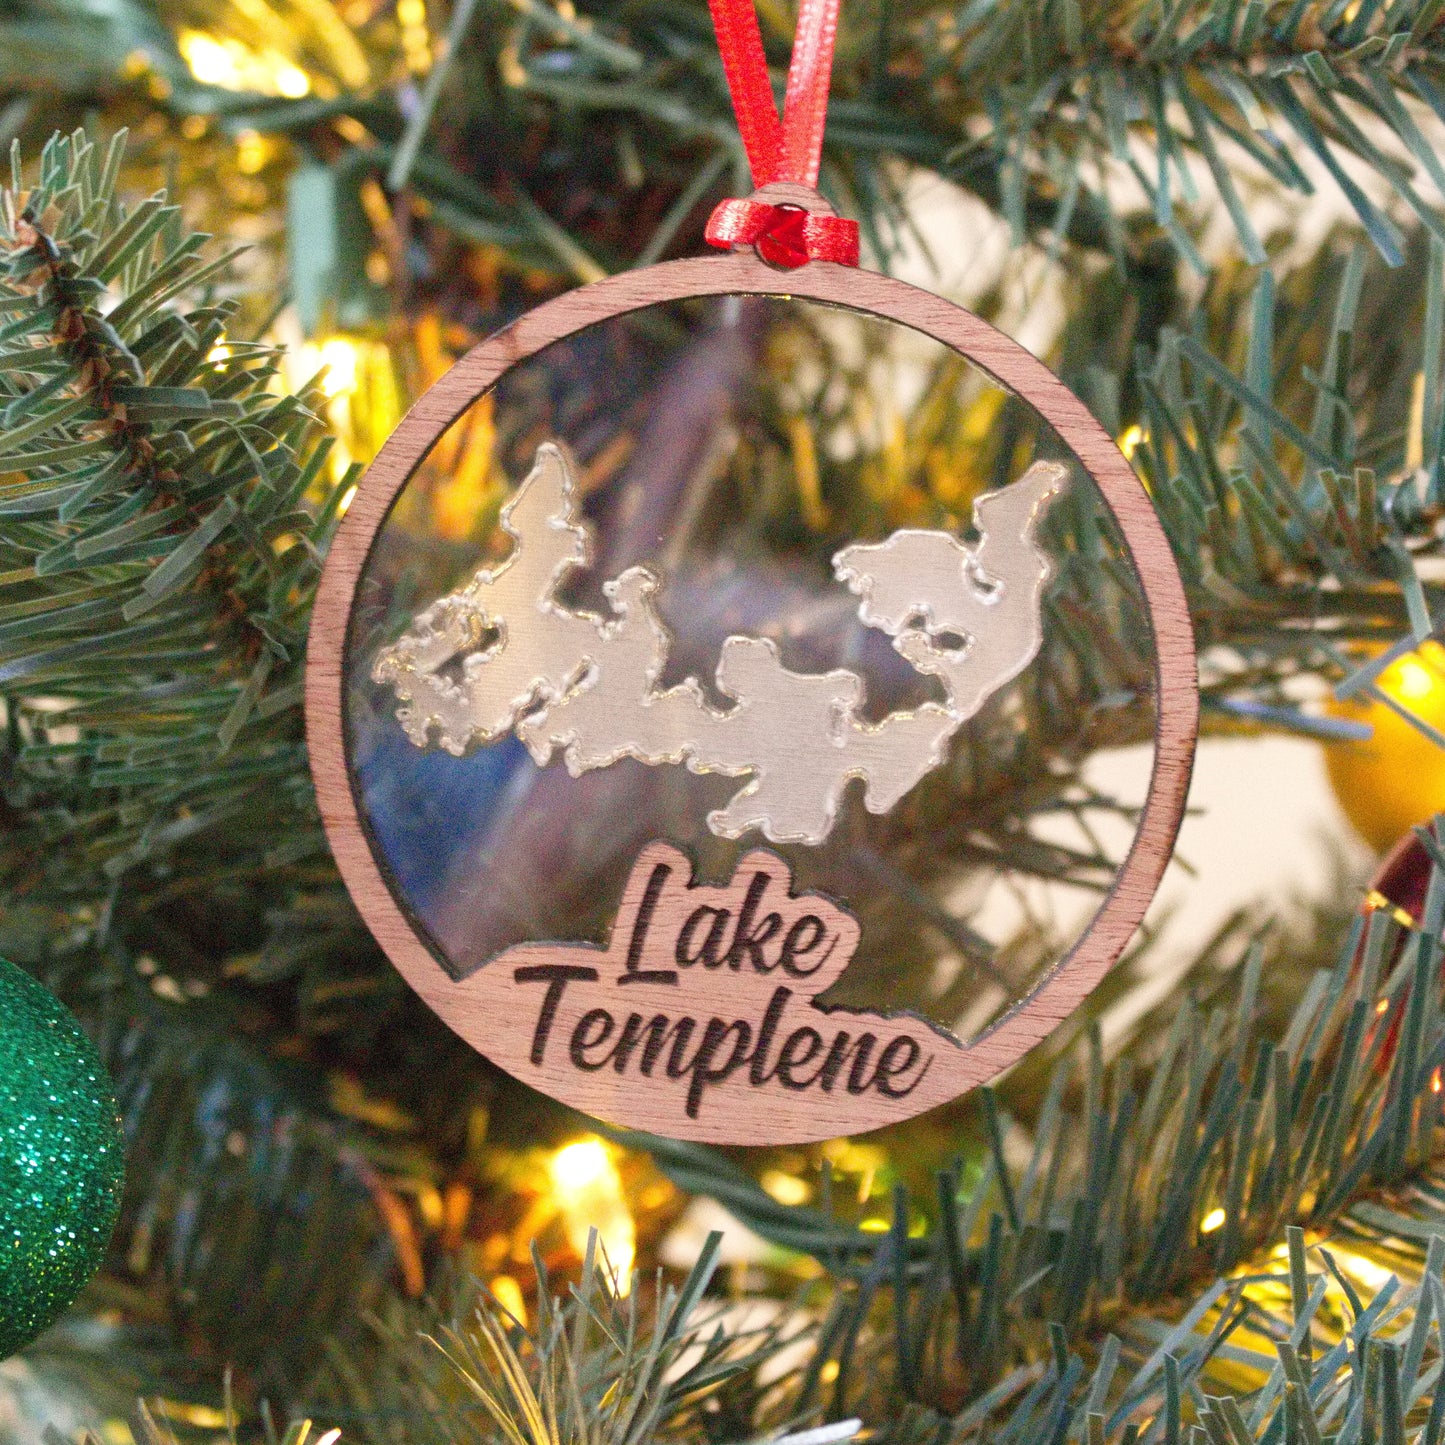 Lake Templene Acrylic and Wood Christmas Ornament.  Great for a personalized and custom gift for grandparents, parents, or children.    